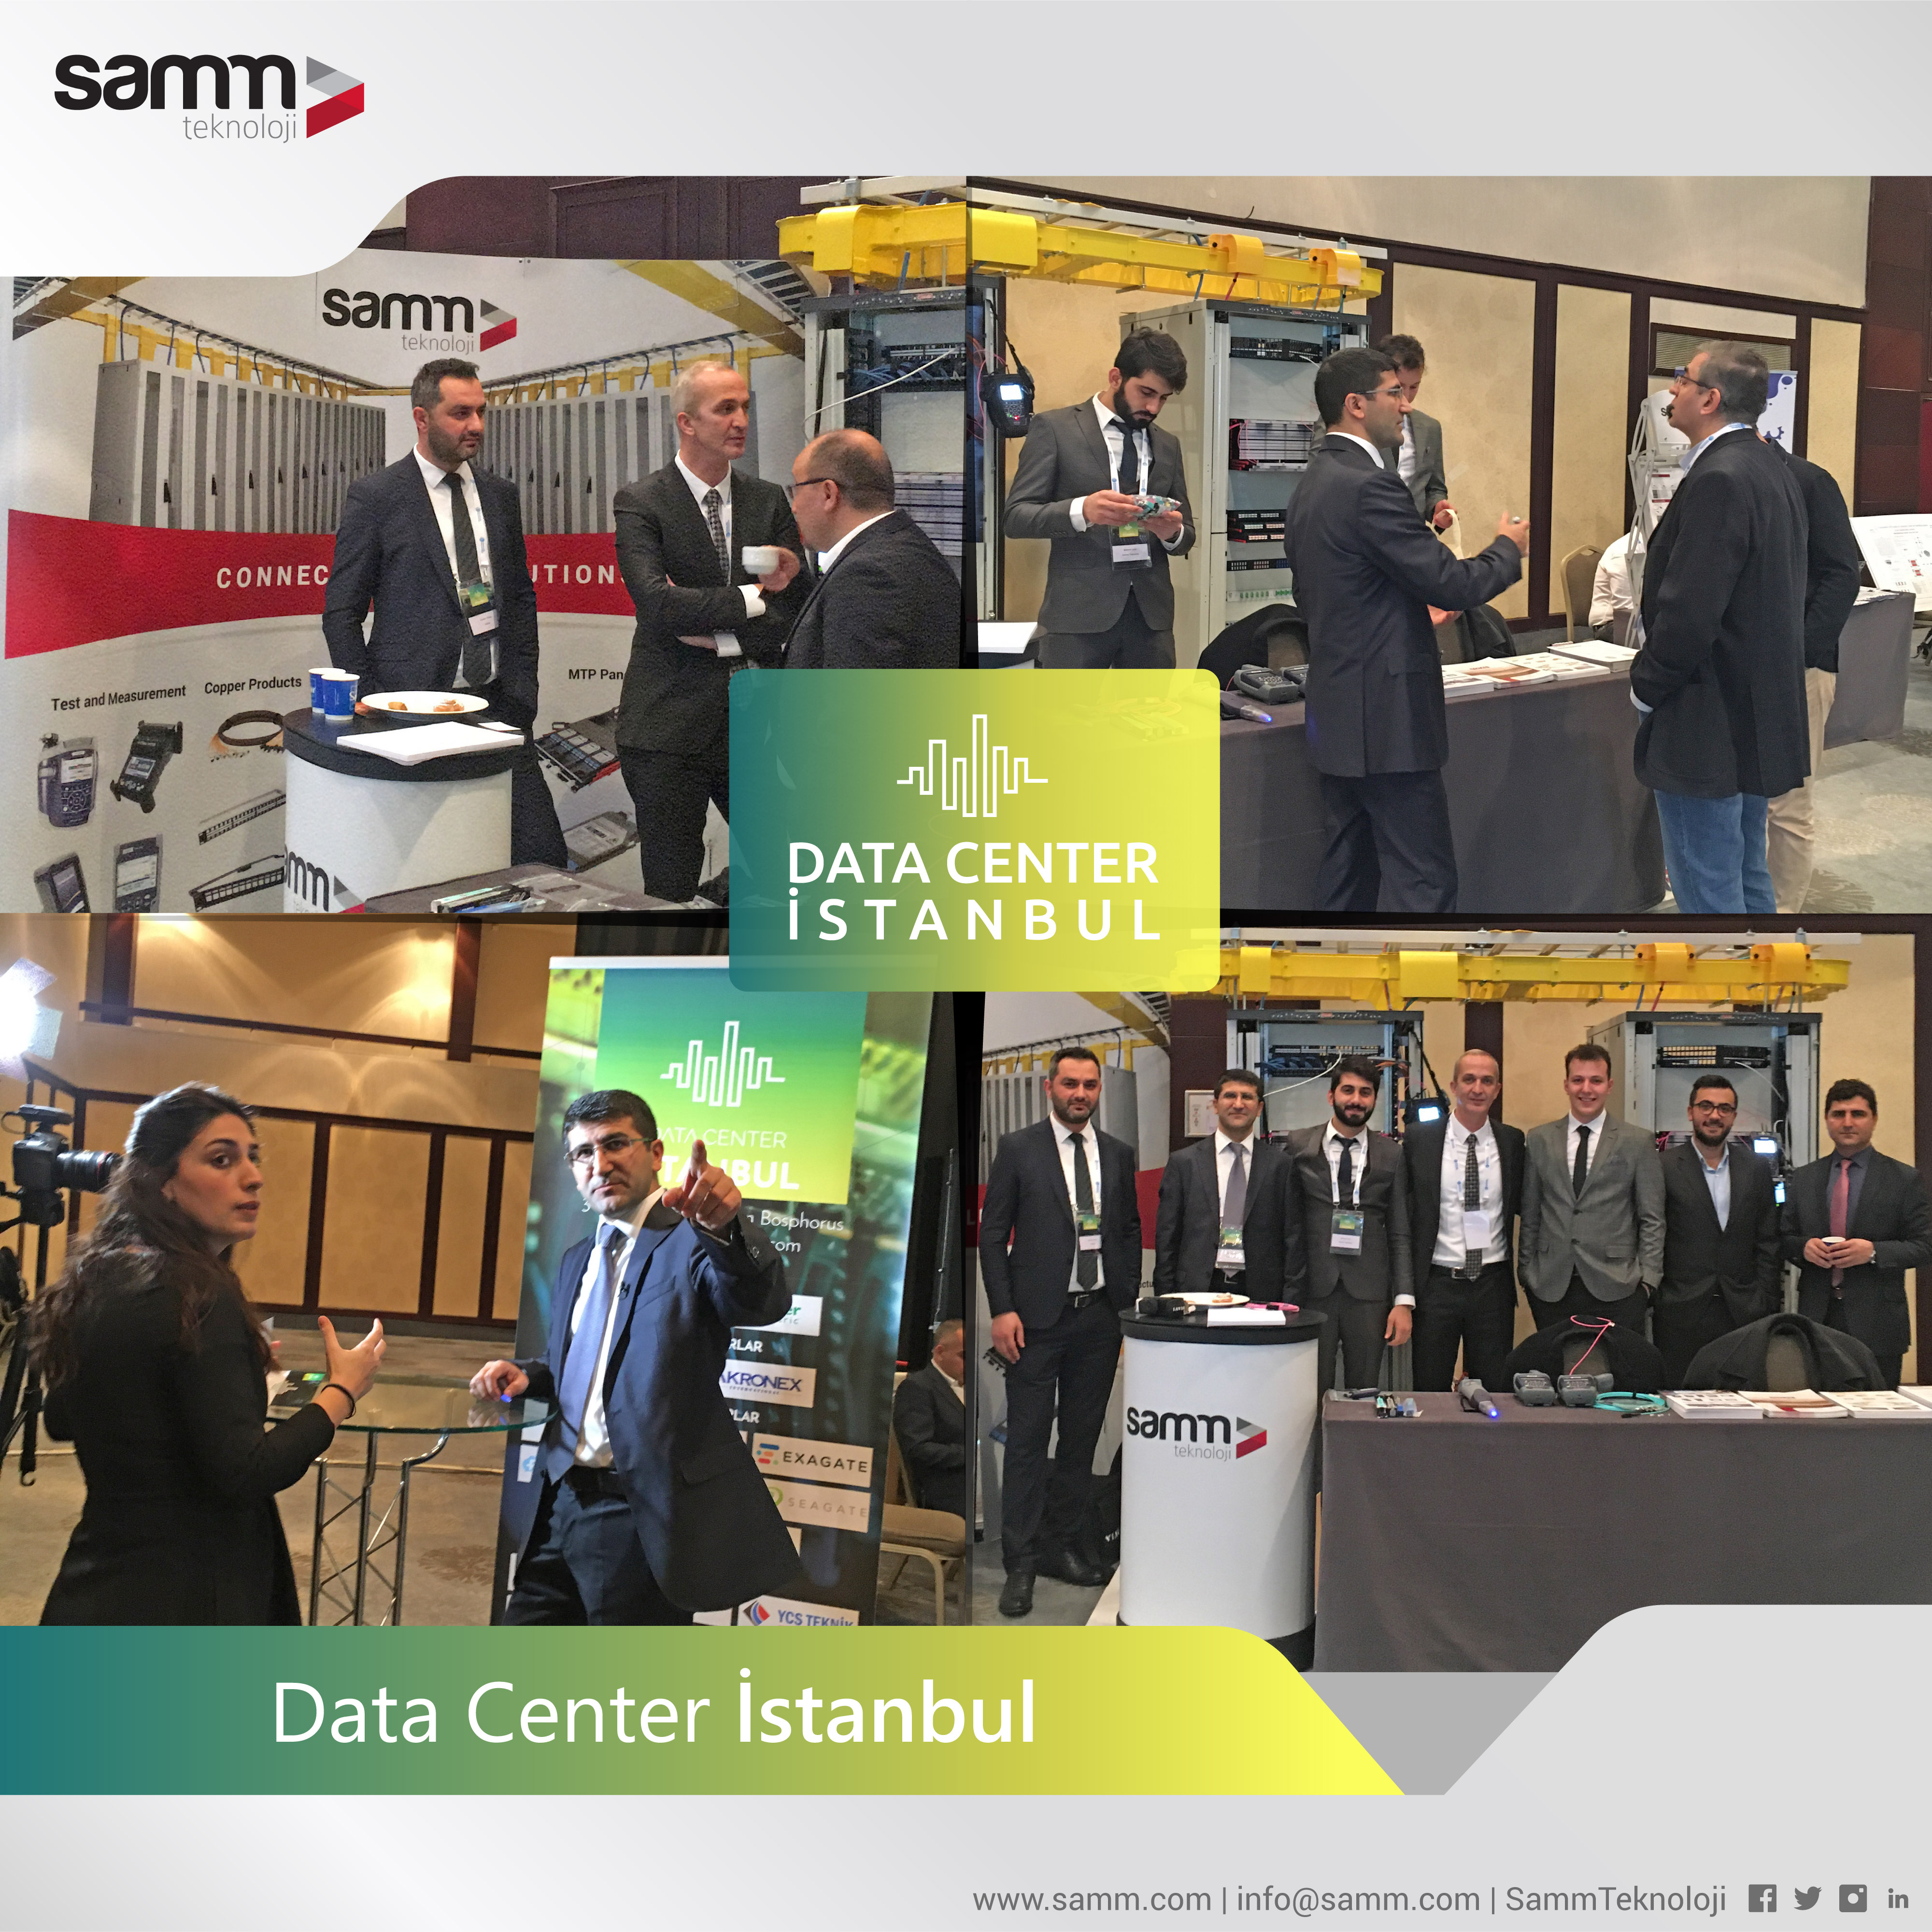 Our Participation at The Data Center Istanbul Exhibition